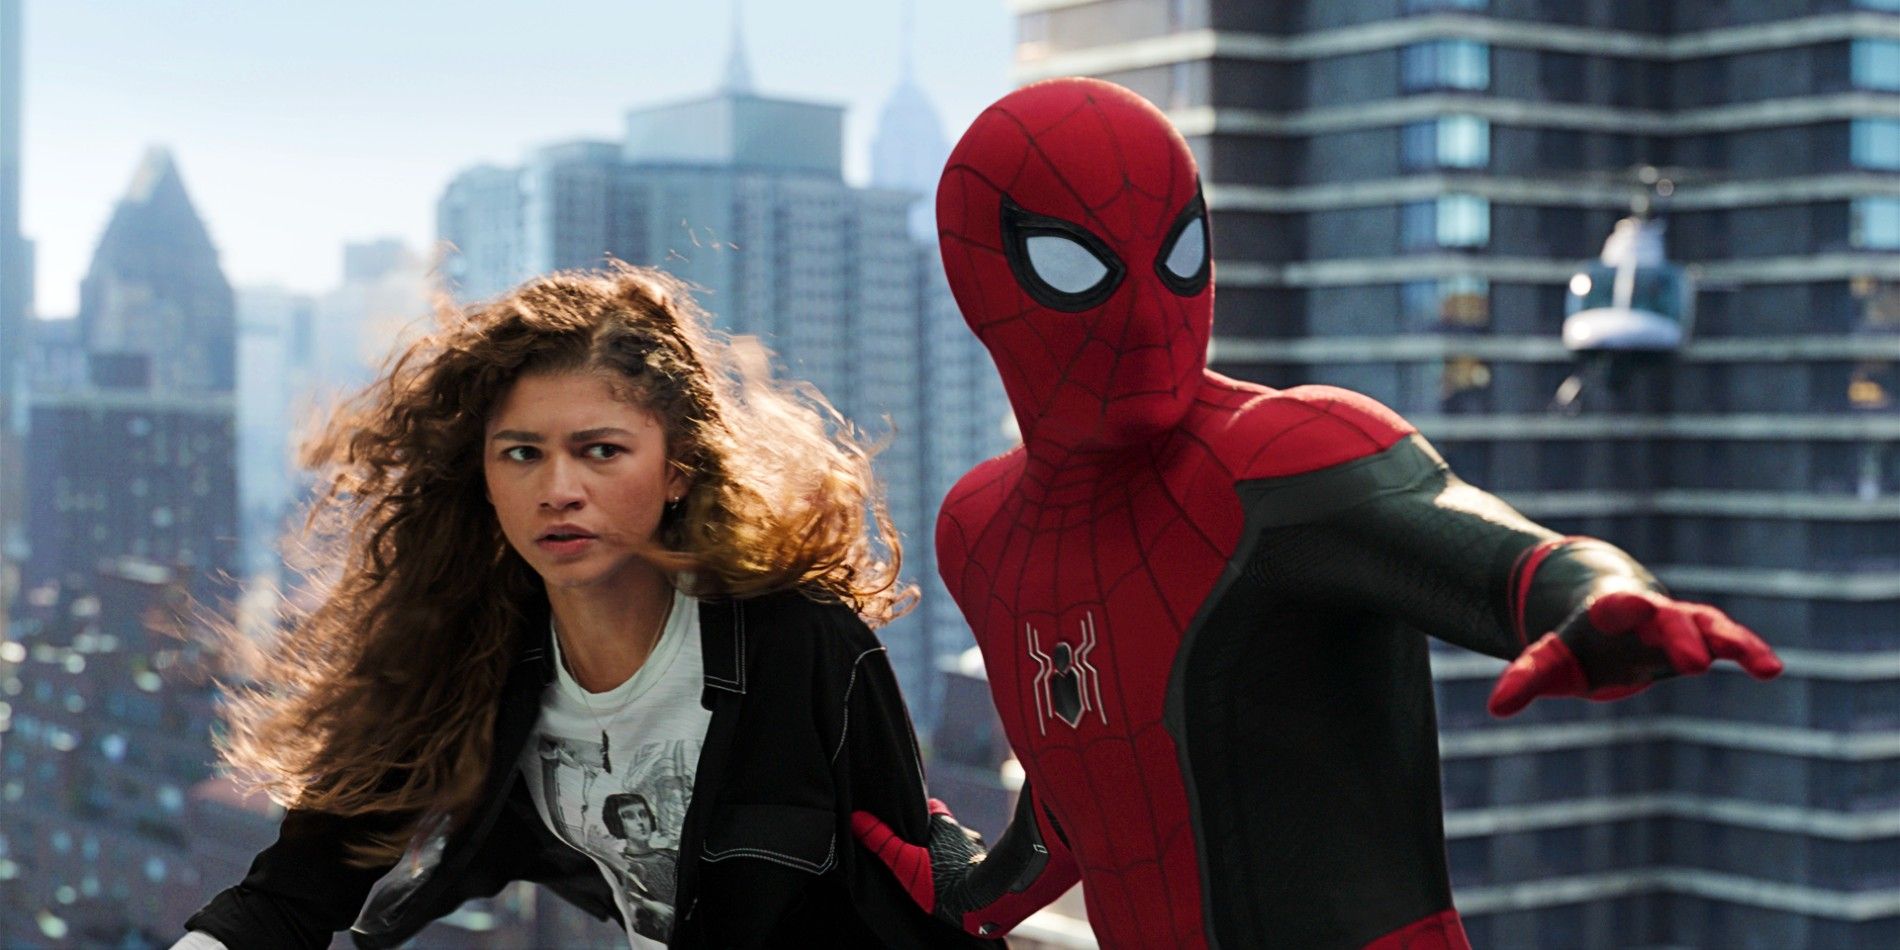 Zendaya Worried About Tom Holland Throwing Up In SpiderMan Suit